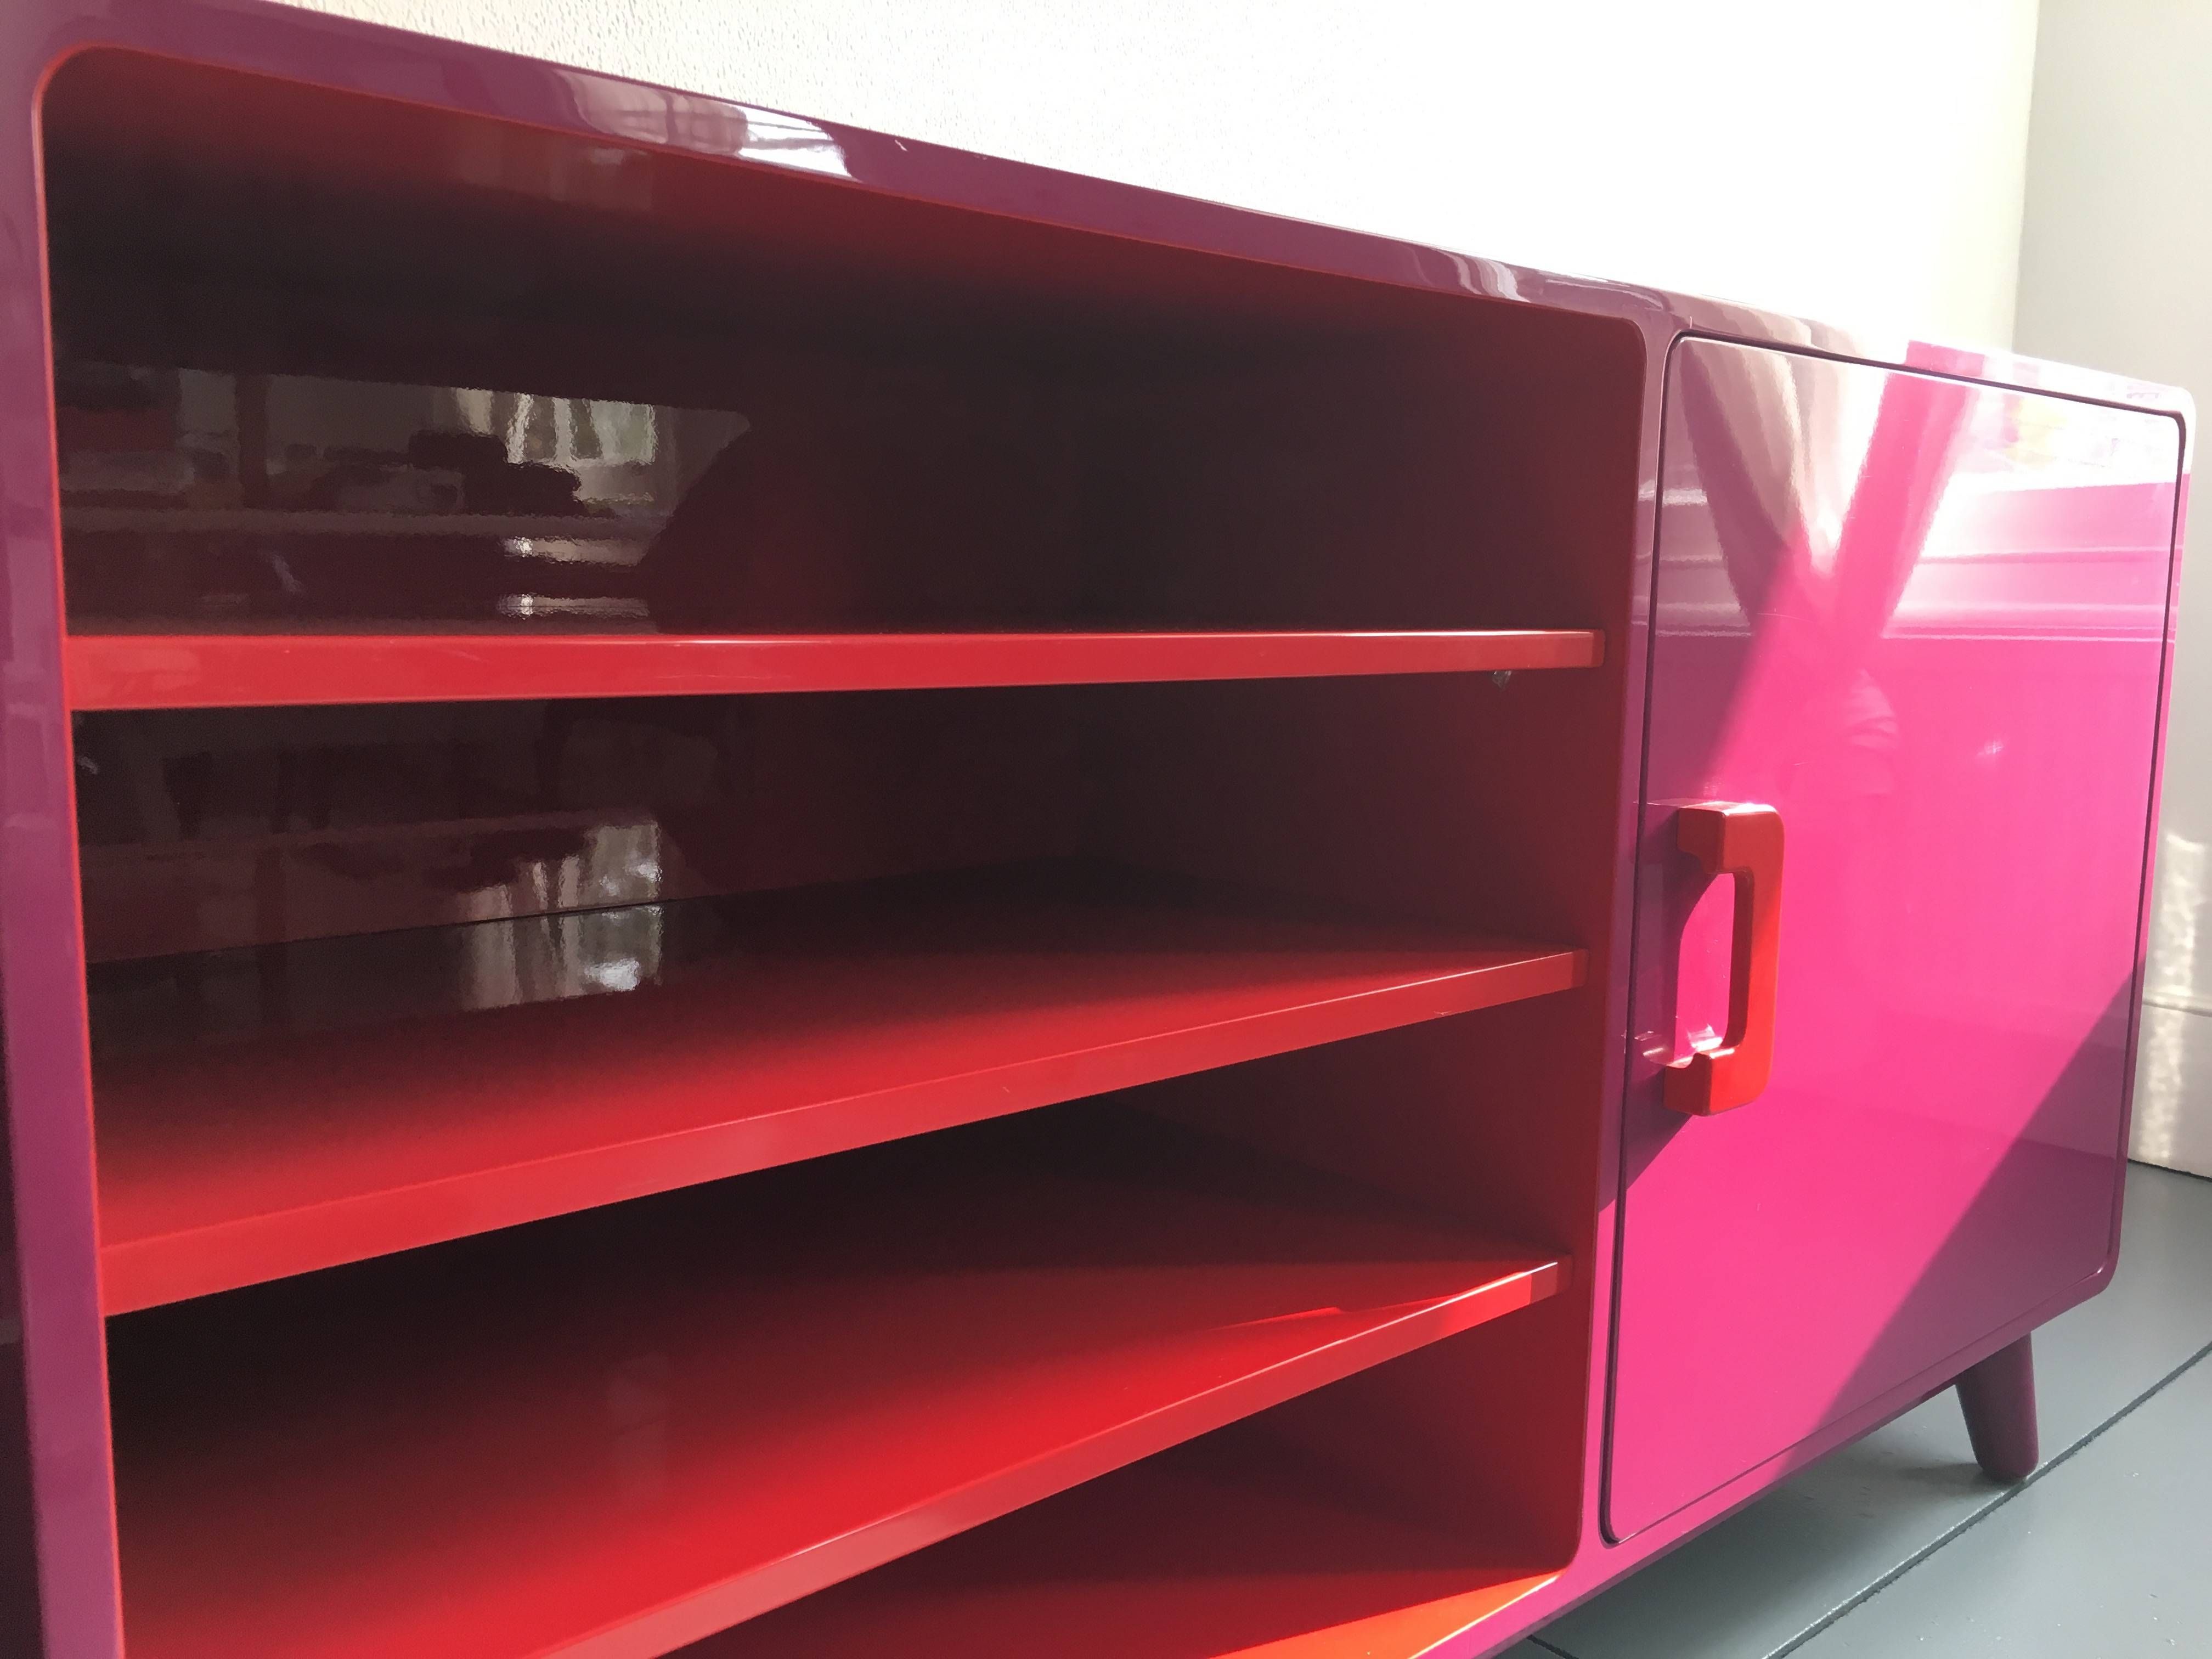 60's Inspired High Gloss Lacquered Sideboard In Hot Pink And Red Inside Red High Gloss Sideboard (View 15 of 20)